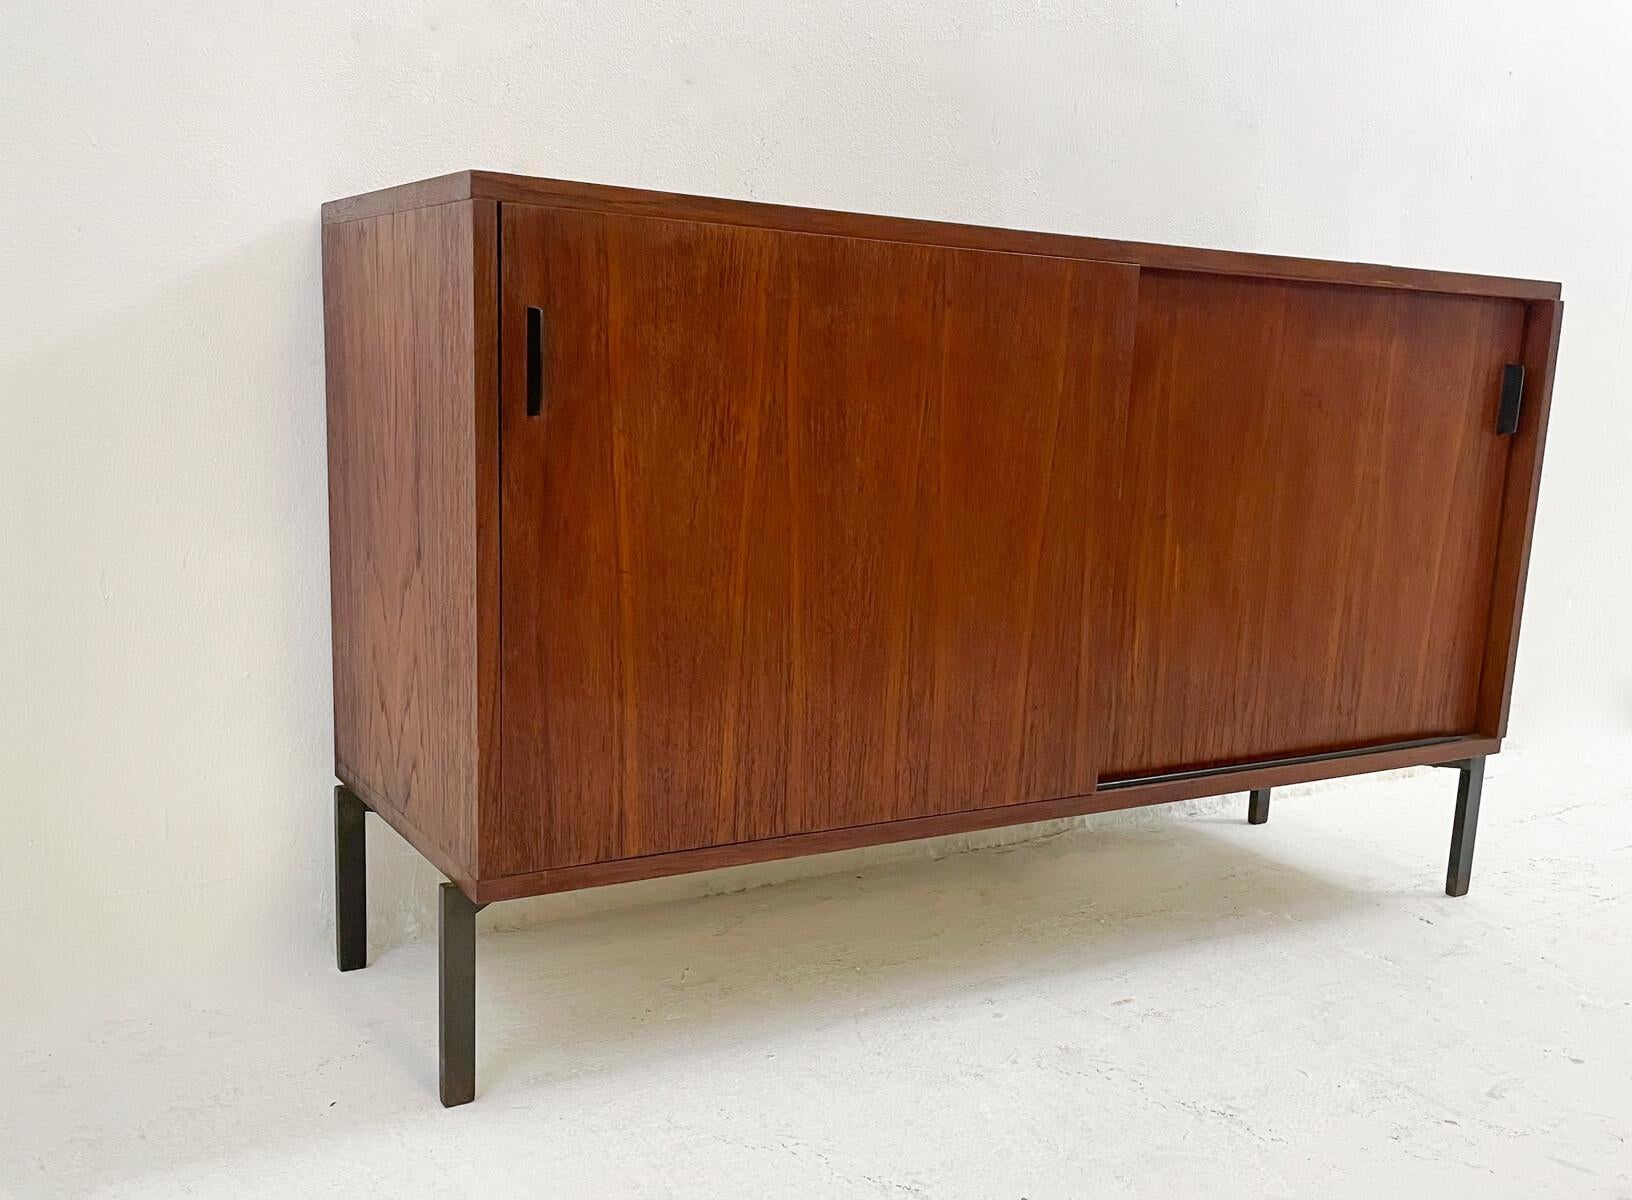 Mid-Century Modern Sideboard, Wood, Germany, 1960s - 2 Available For Sale 2